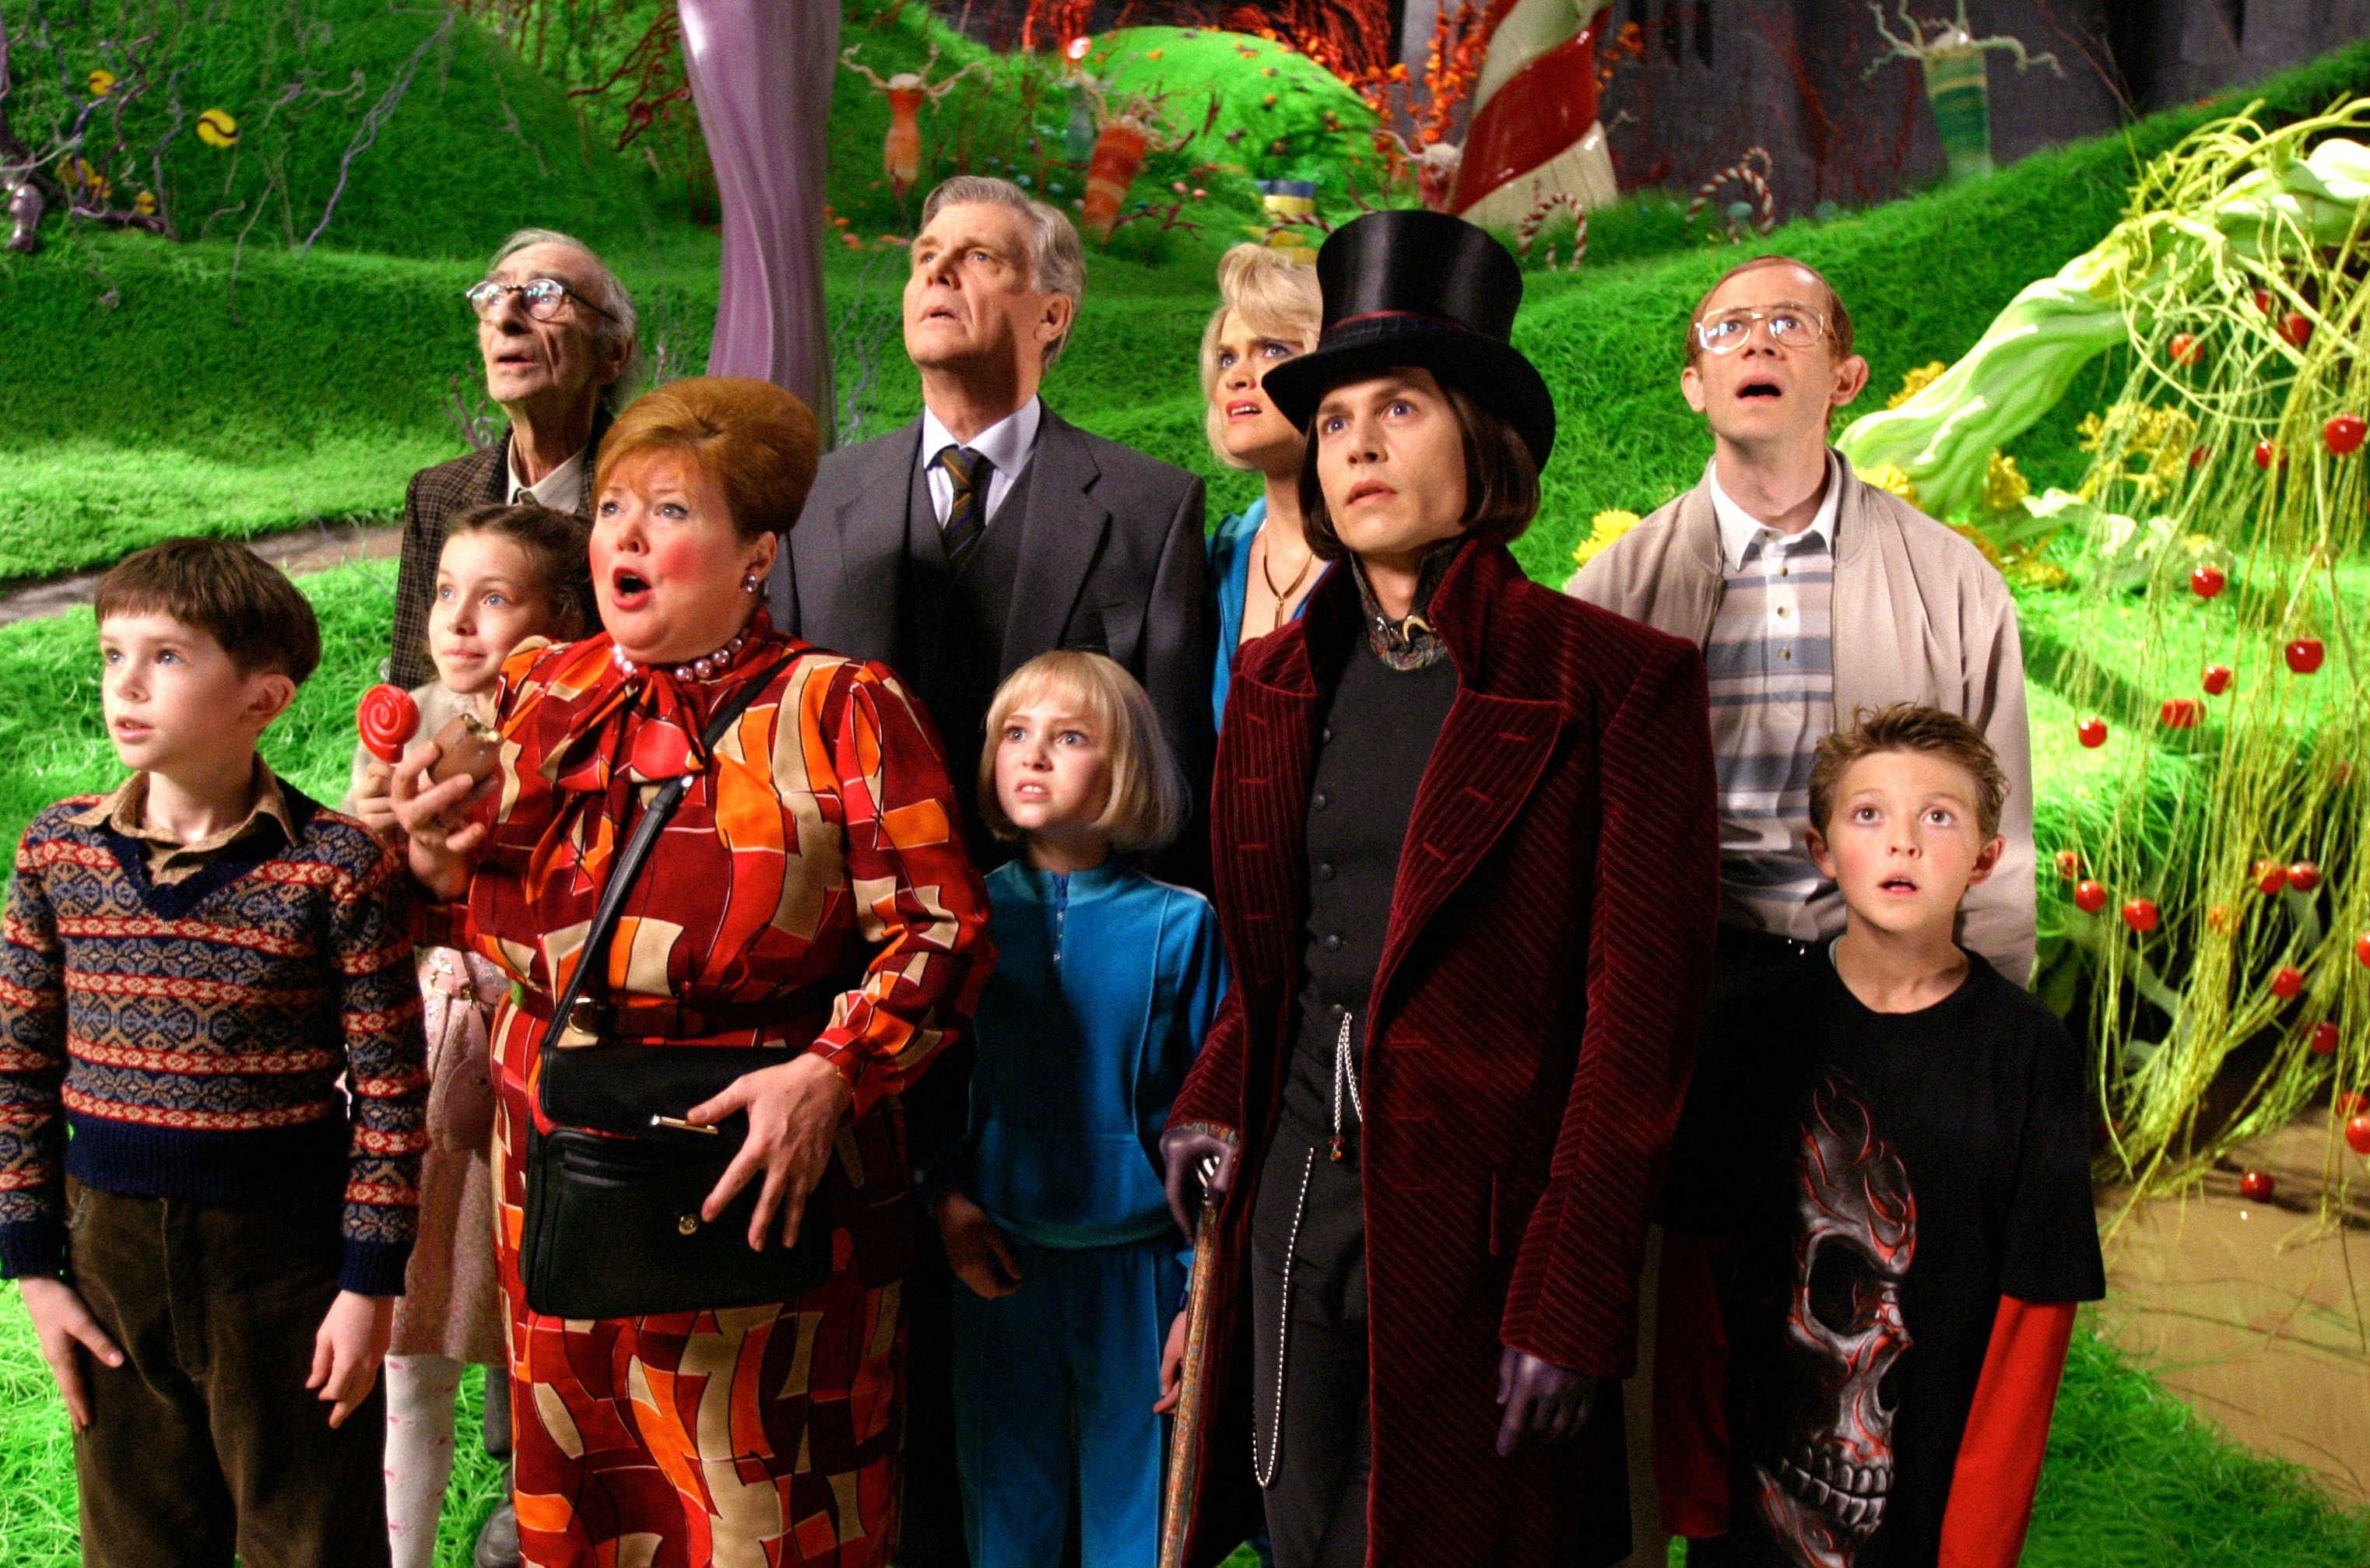 'Harry Potter' Producer Bringing Back 'Willy Wonka' for a Prequel Film